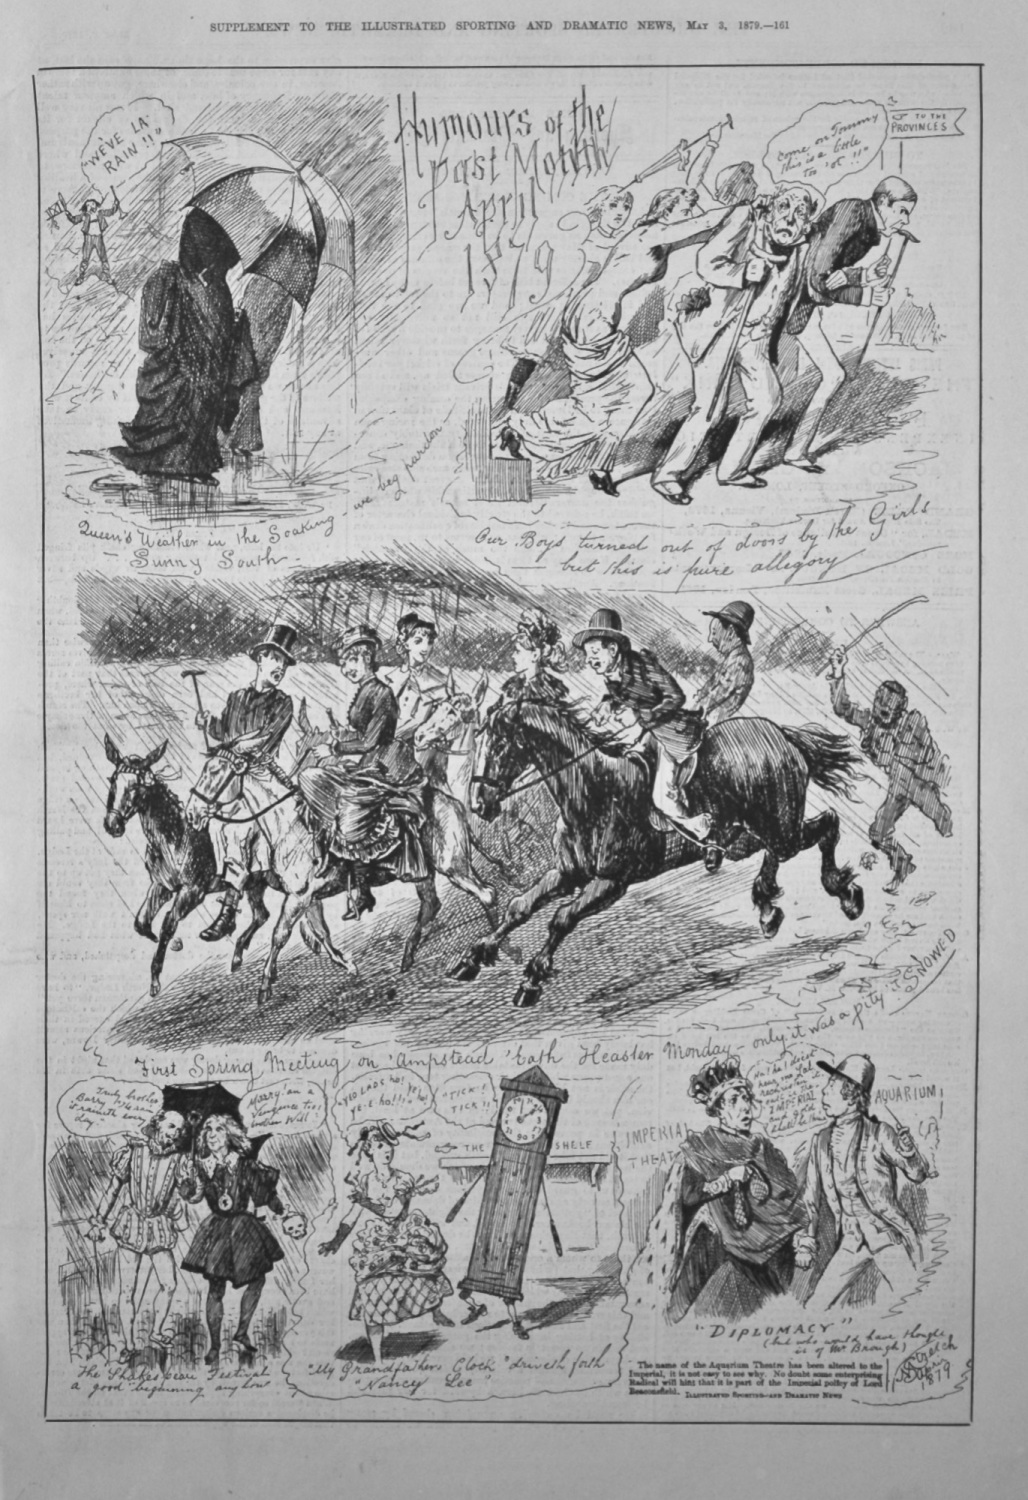 Humours of the Past Month  April 1879.